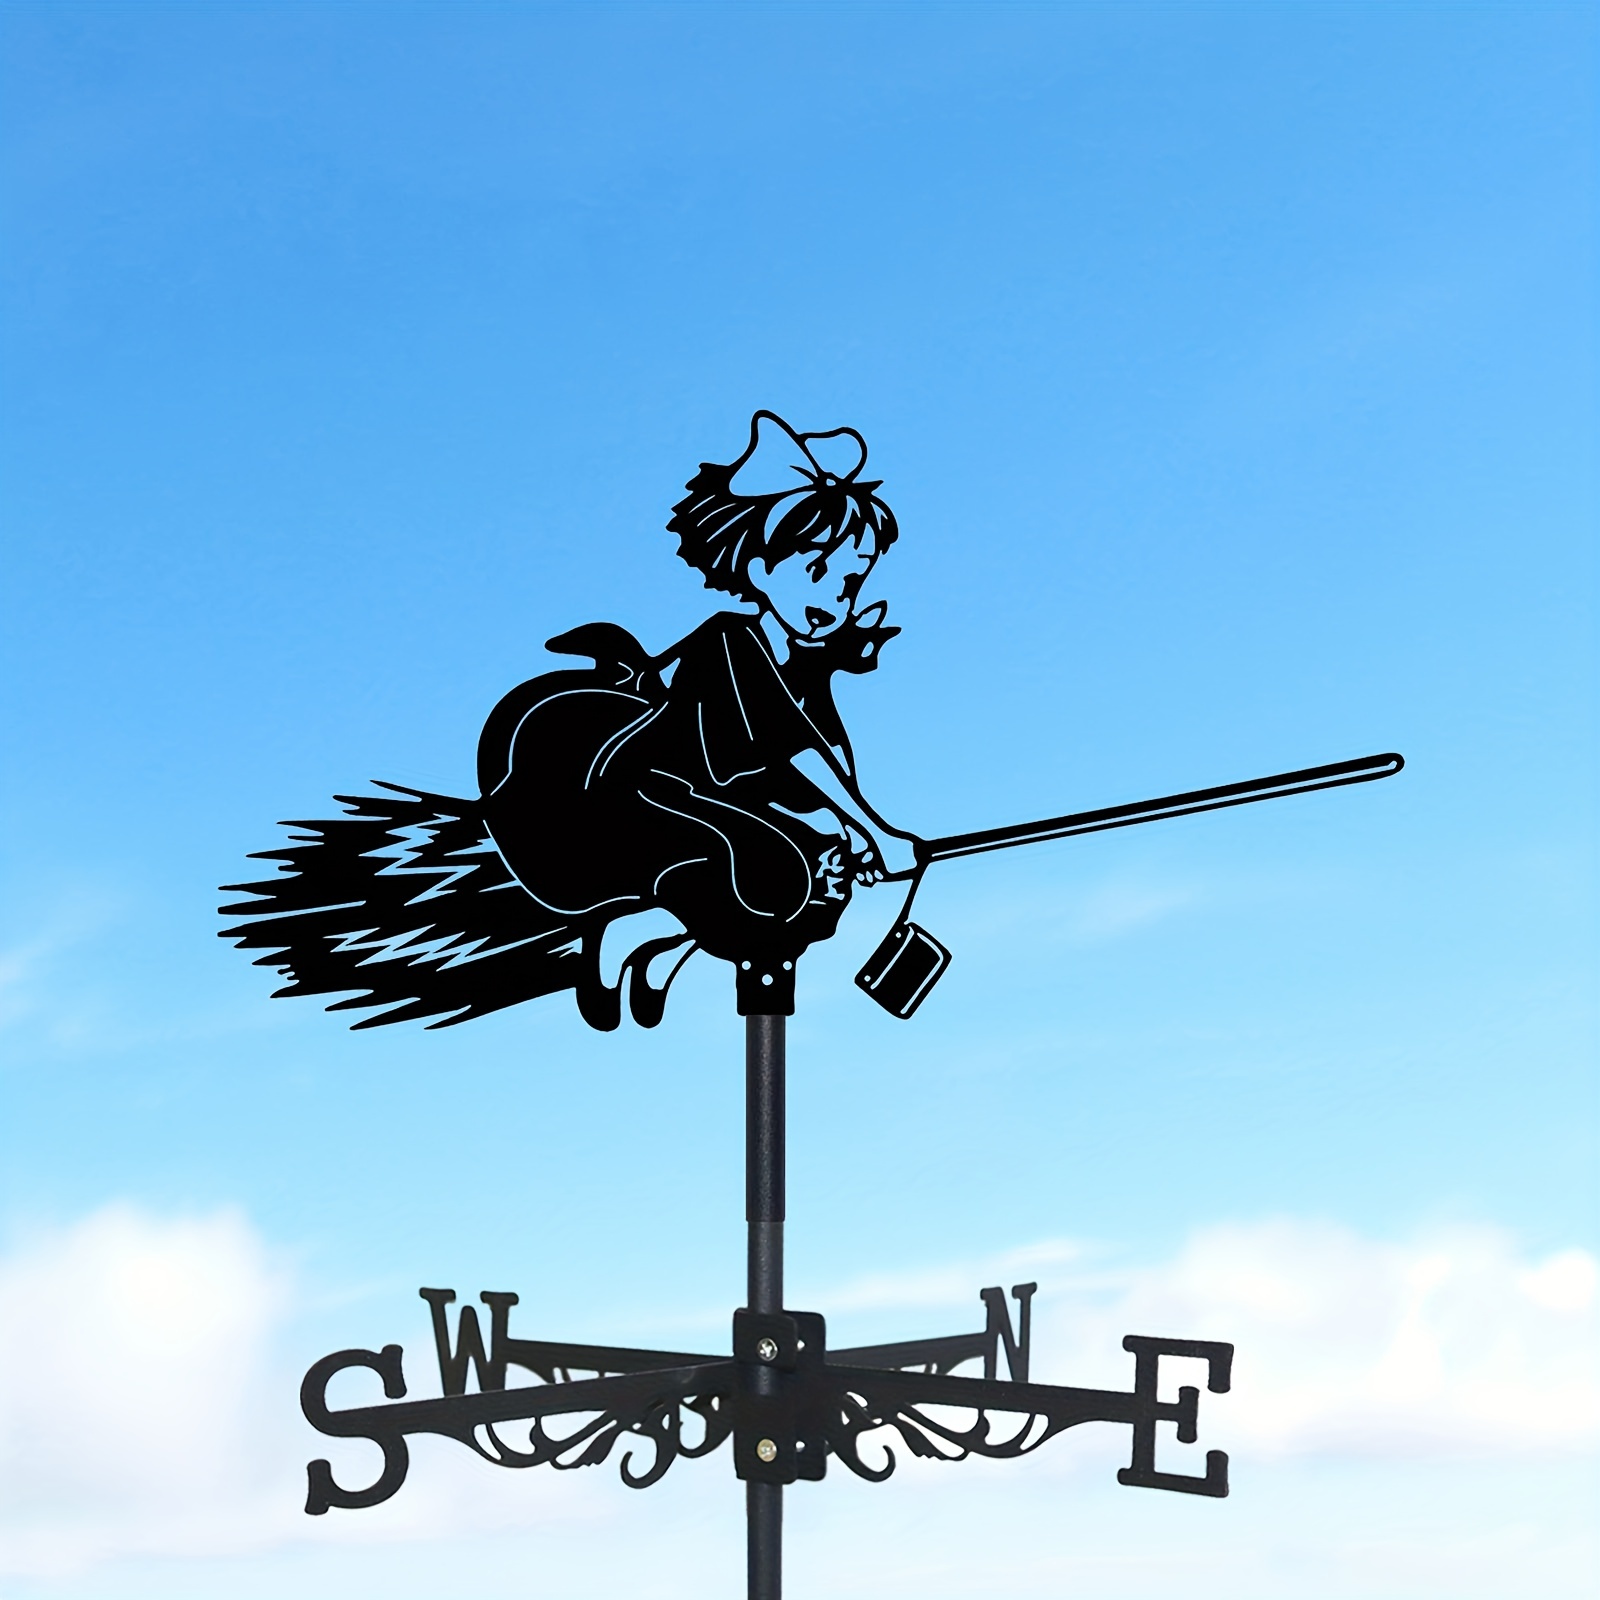 mary poppins chimney sweep silhouette